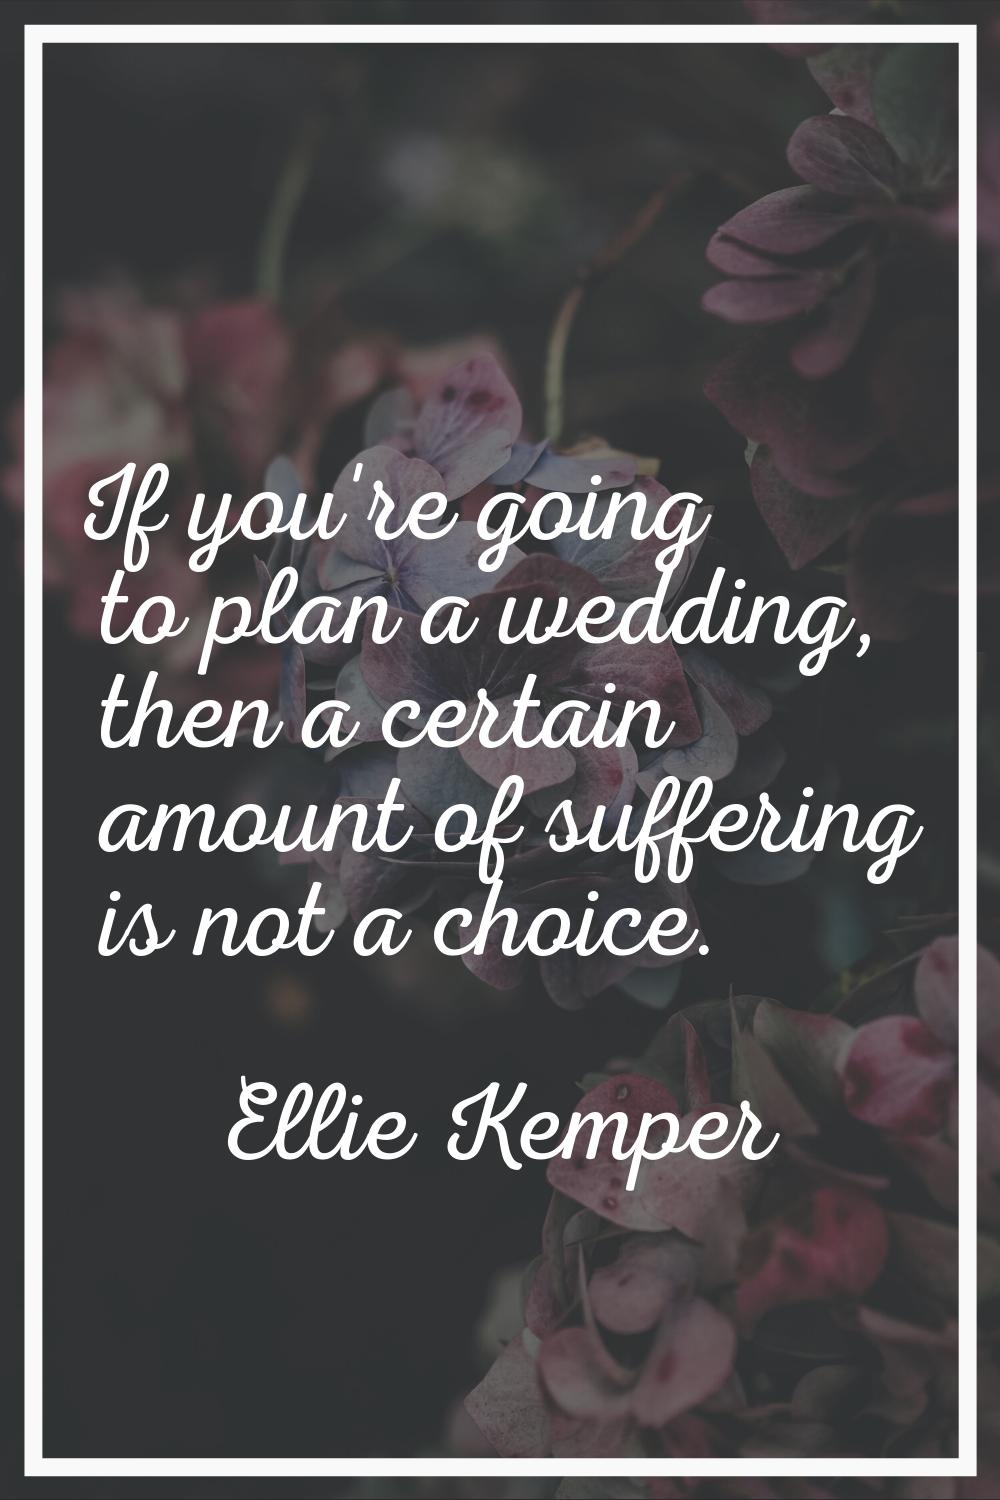 If you're going to plan a wedding, then a certain amount of suffering is not a choice.